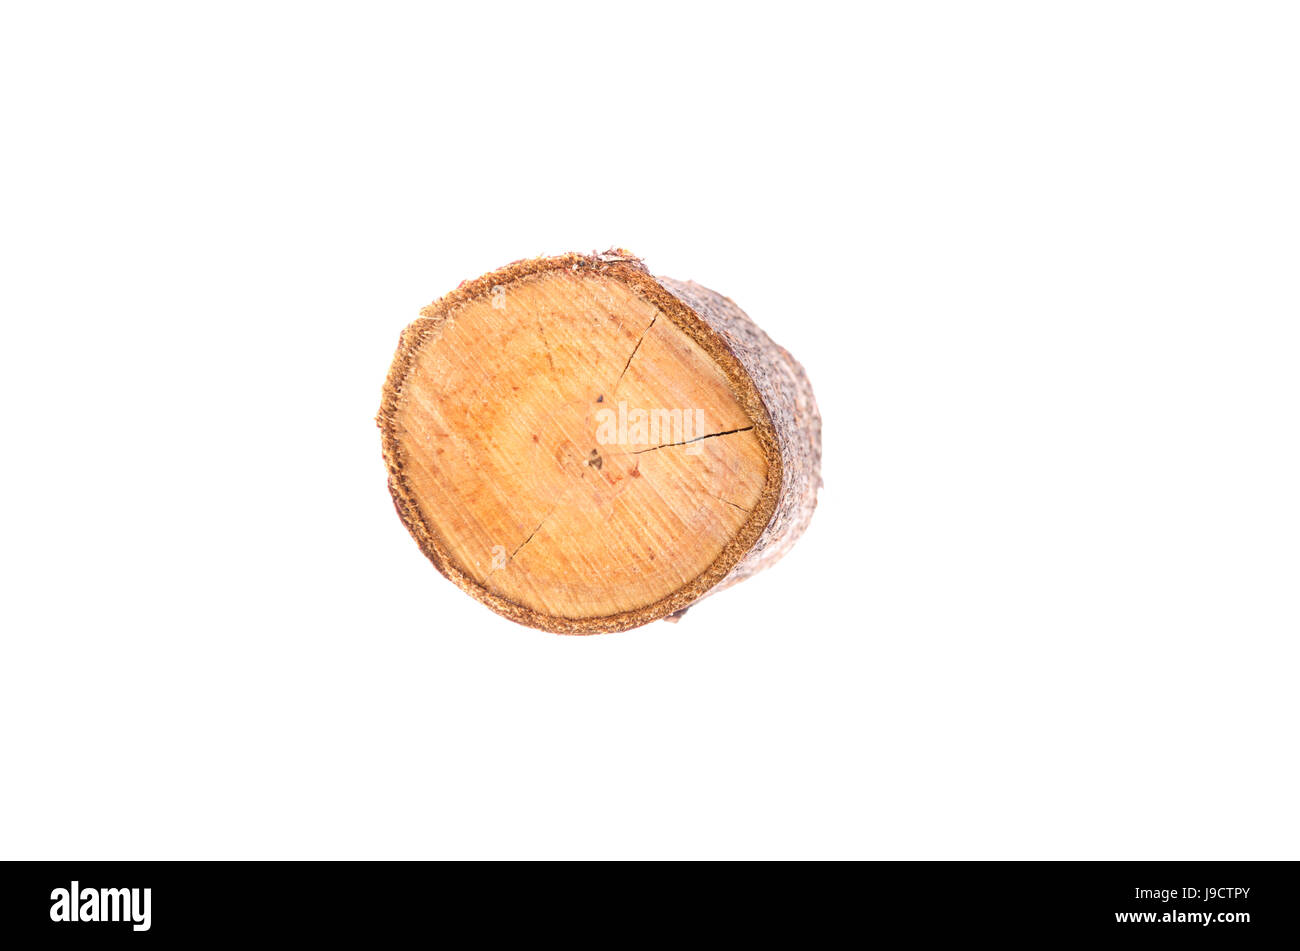 Wooden stump isolated on the white background. Stock Photo